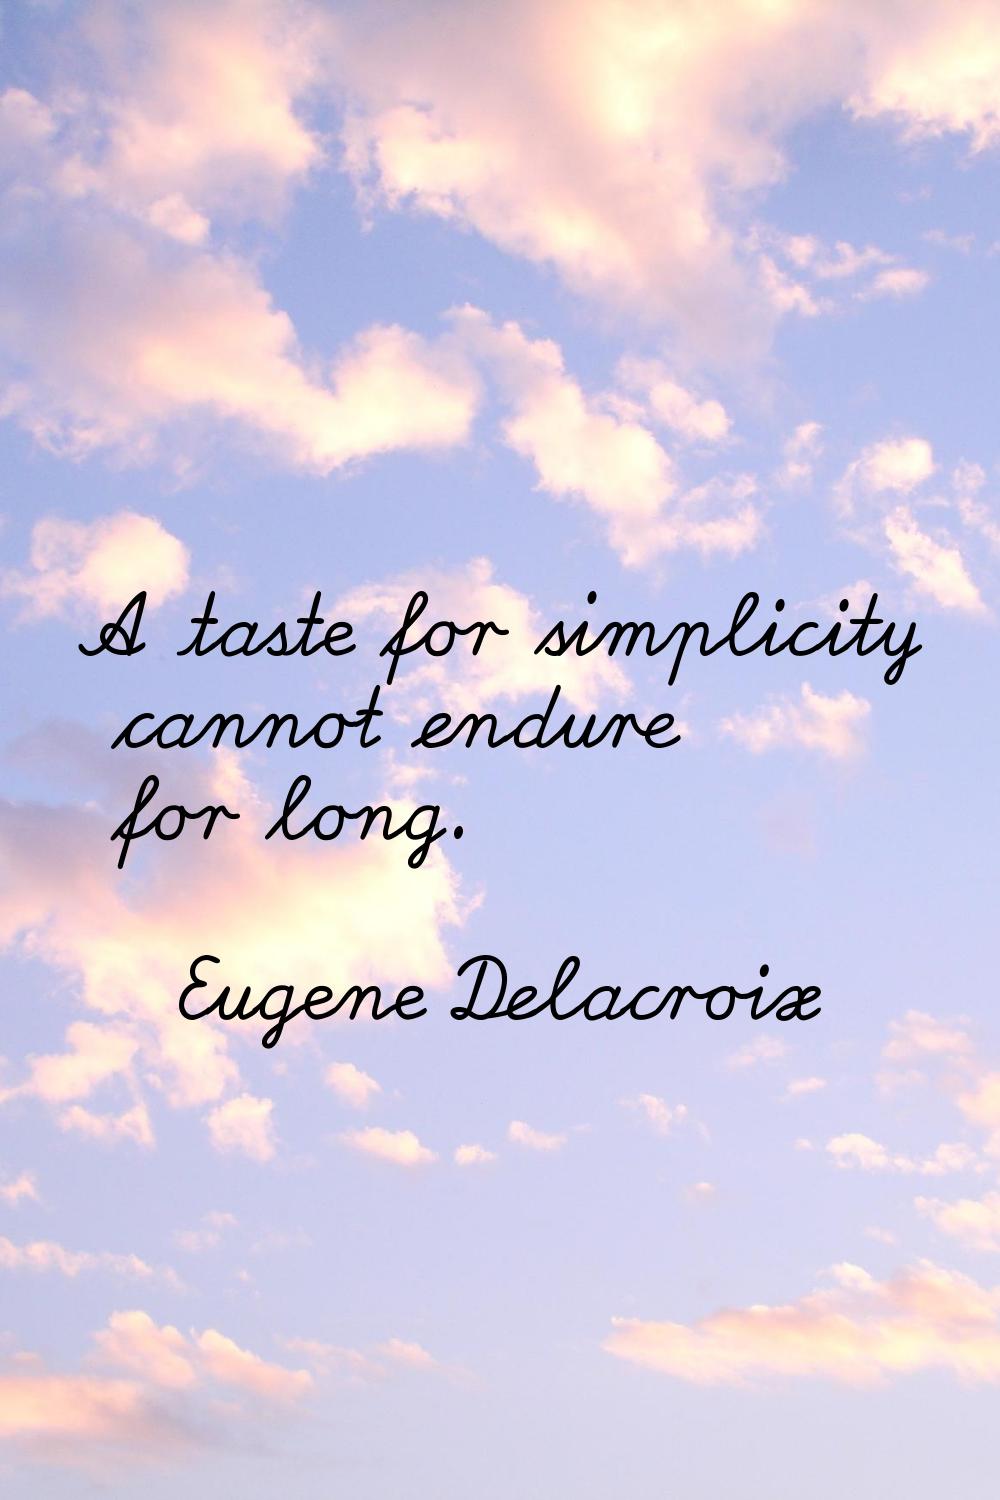 A taste for simplicity cannot endure for long.